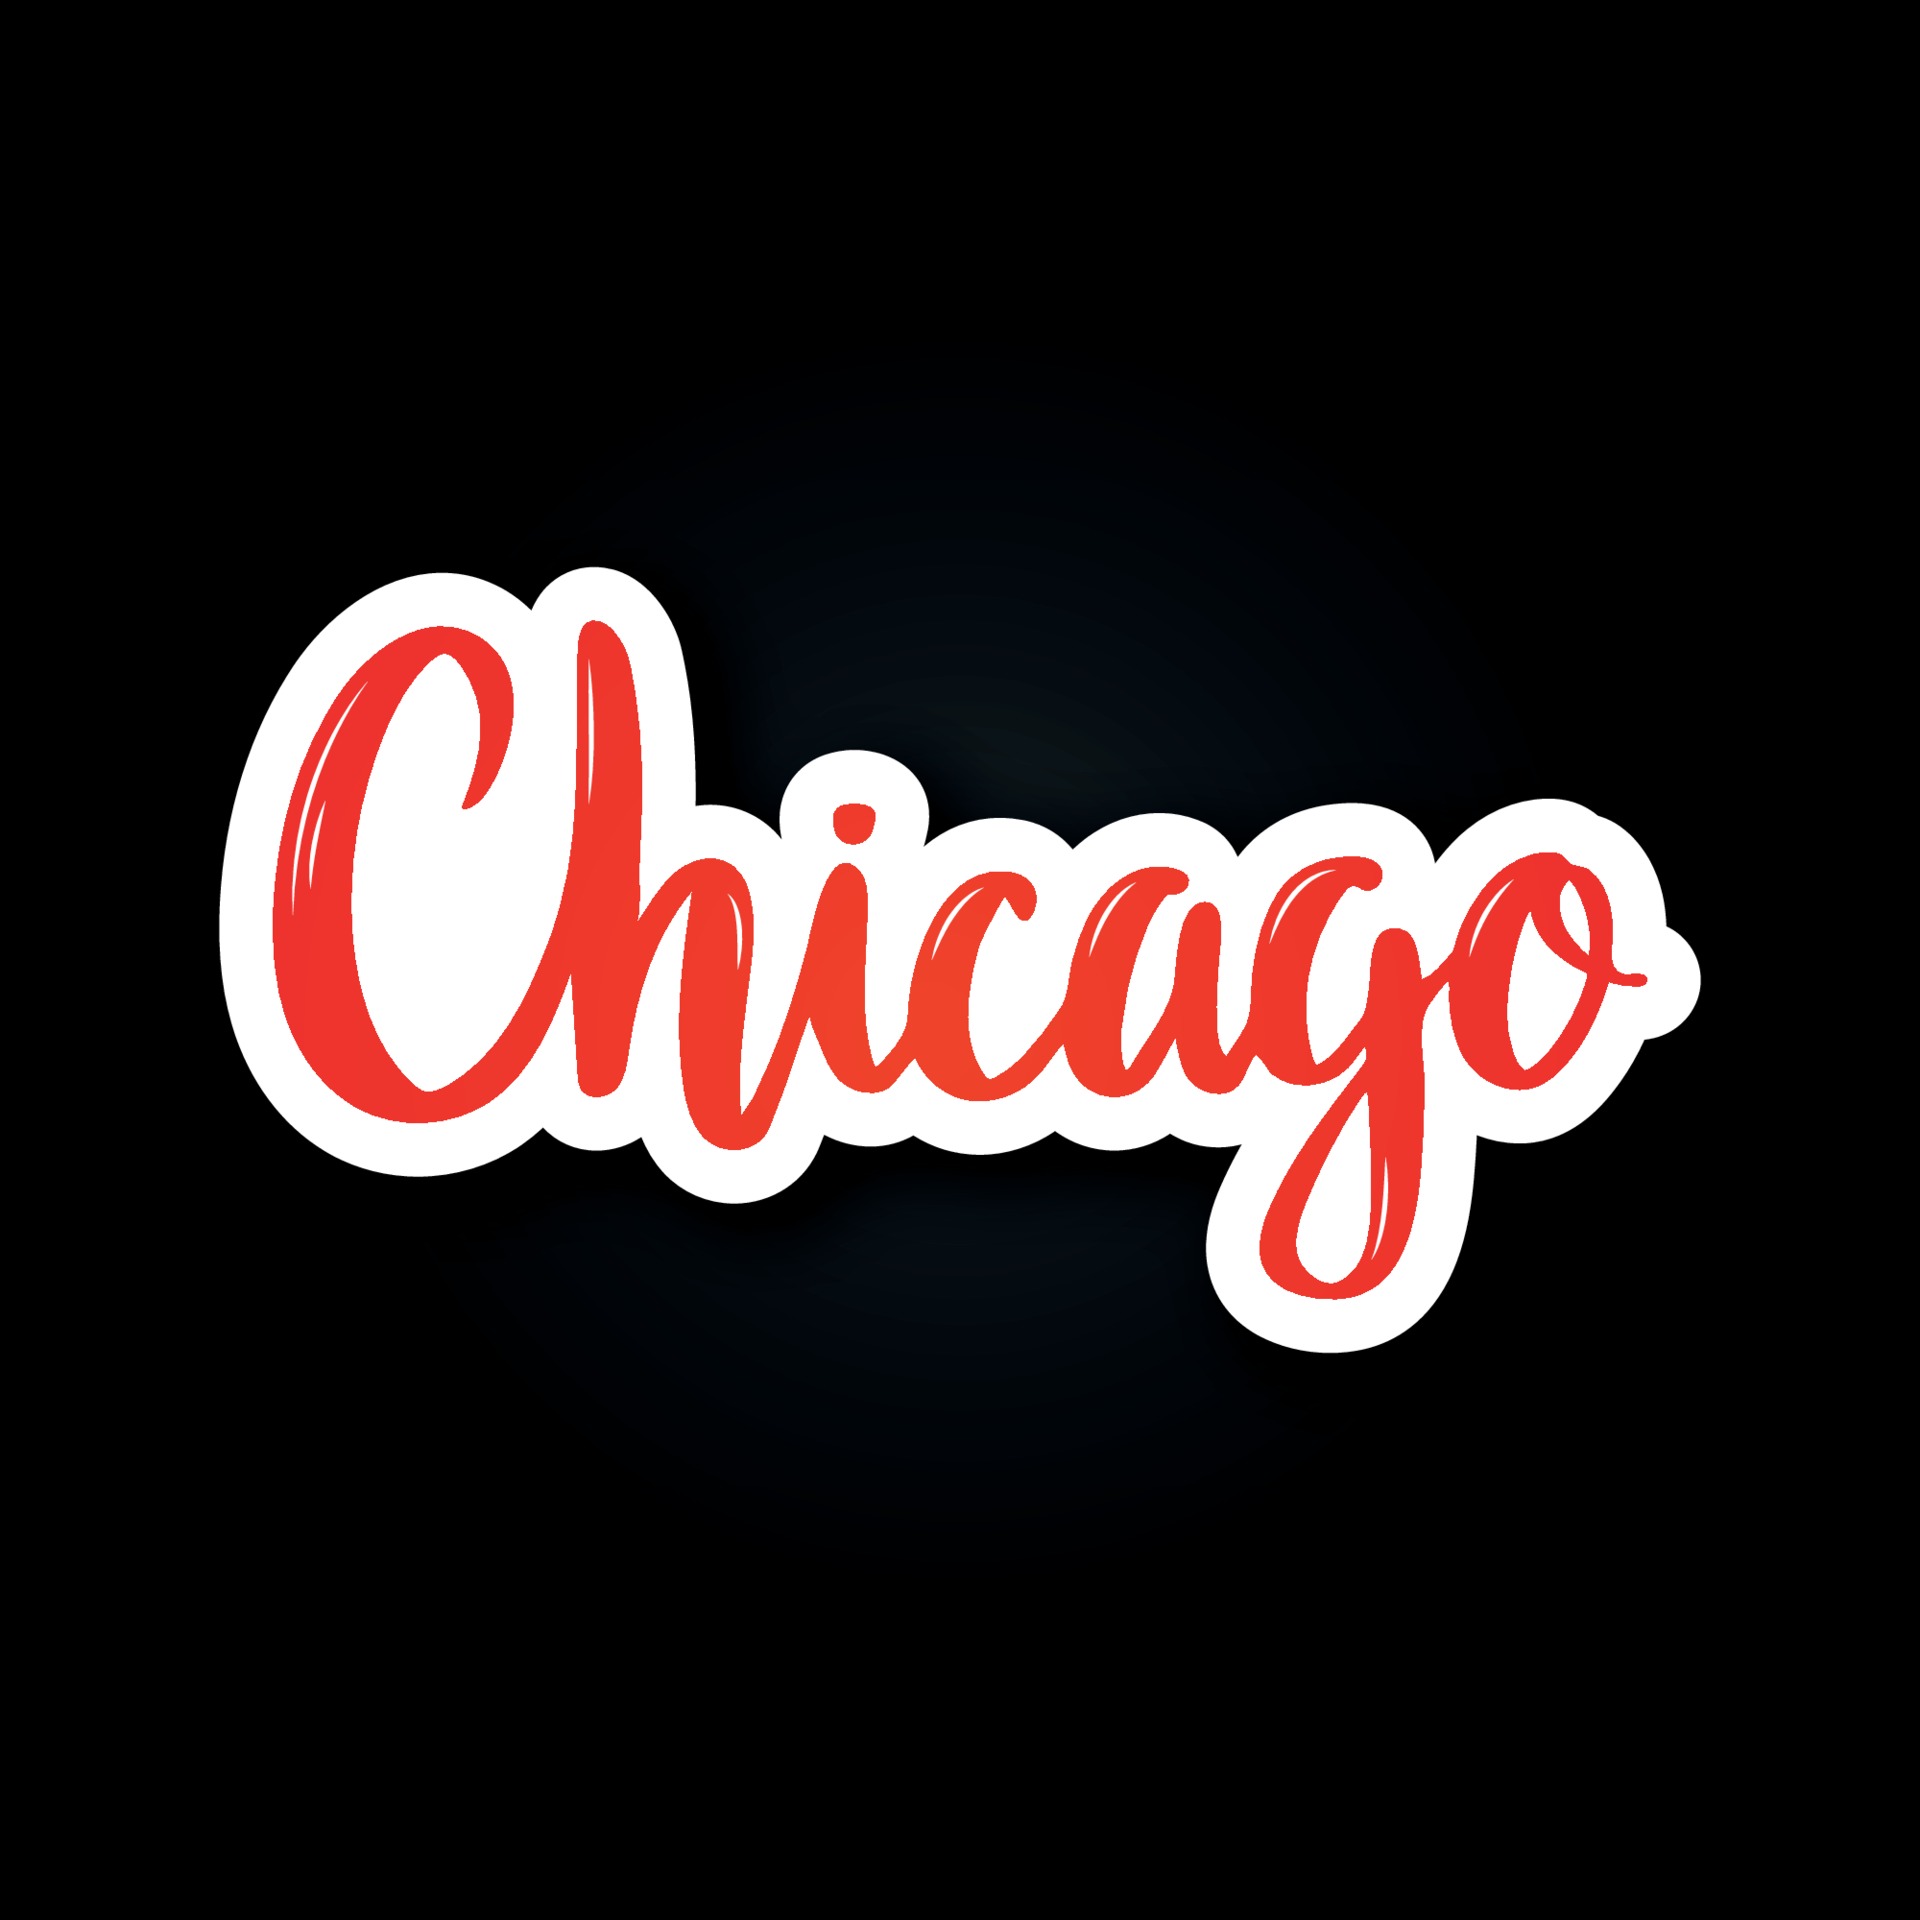 Chicago - hand drawn lettering phrase. Sticker with lettering in